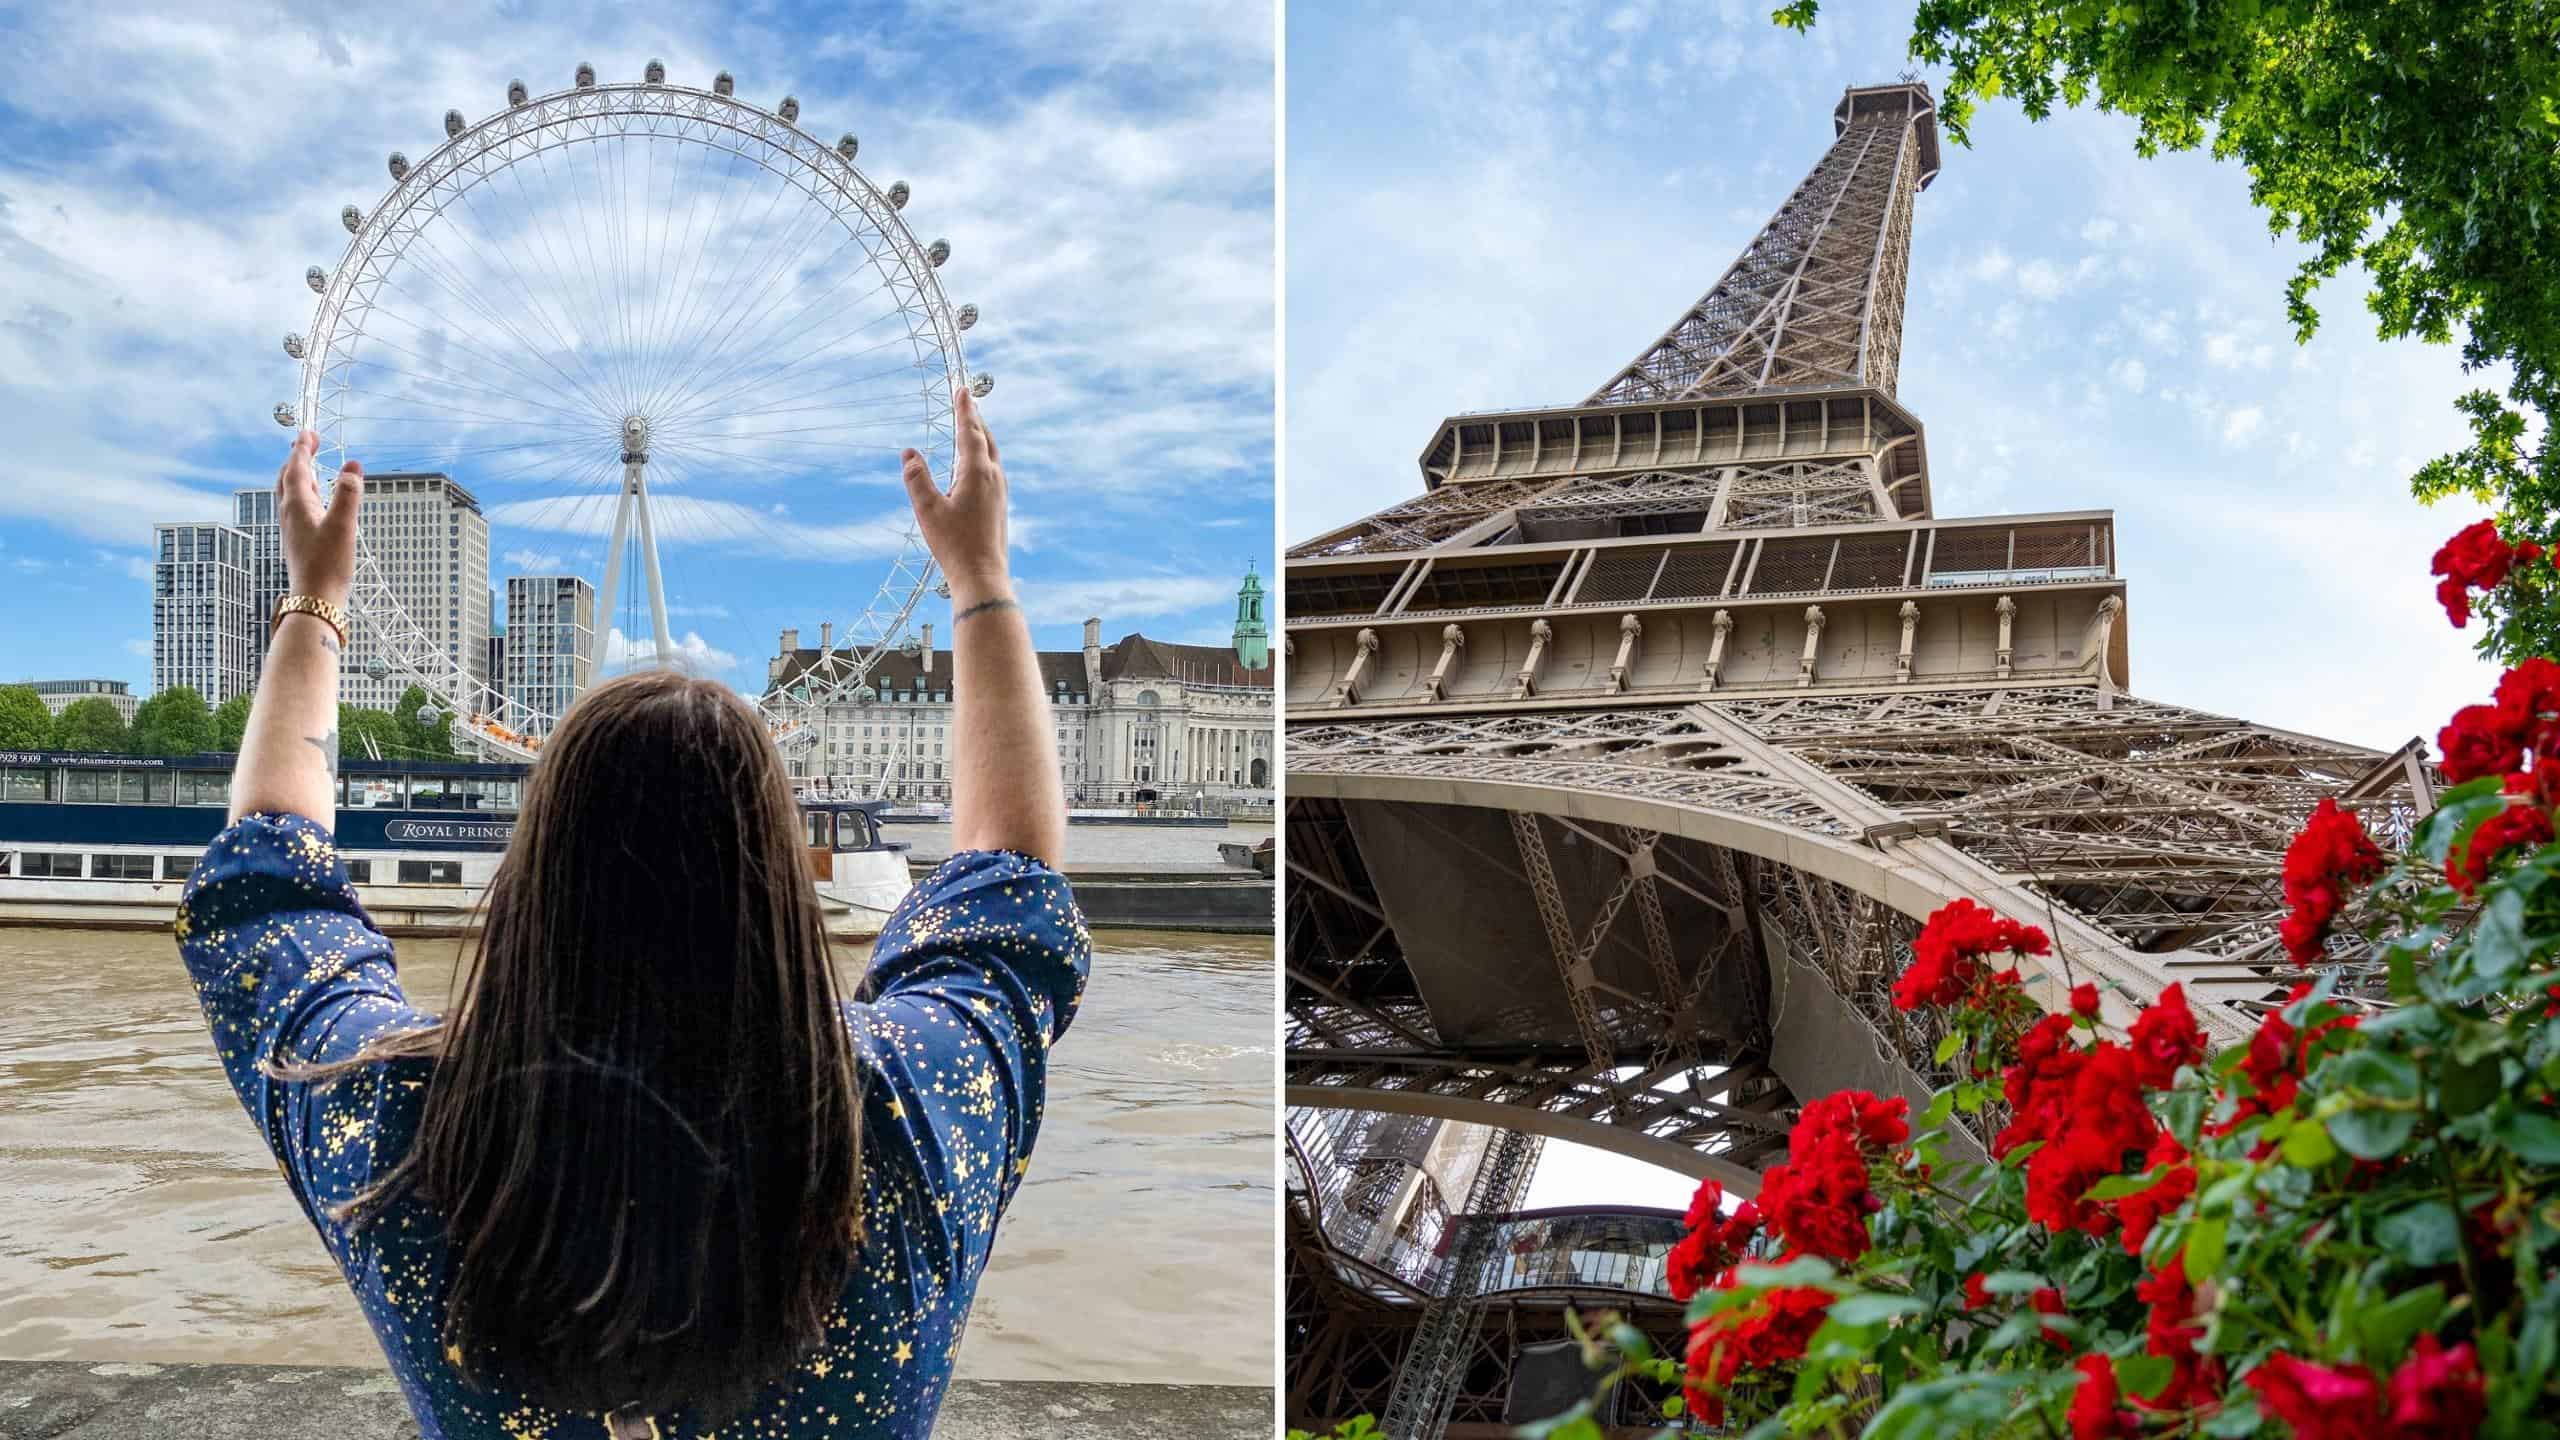 Can't go to Europe? You can find the Eiffel Tower, the London